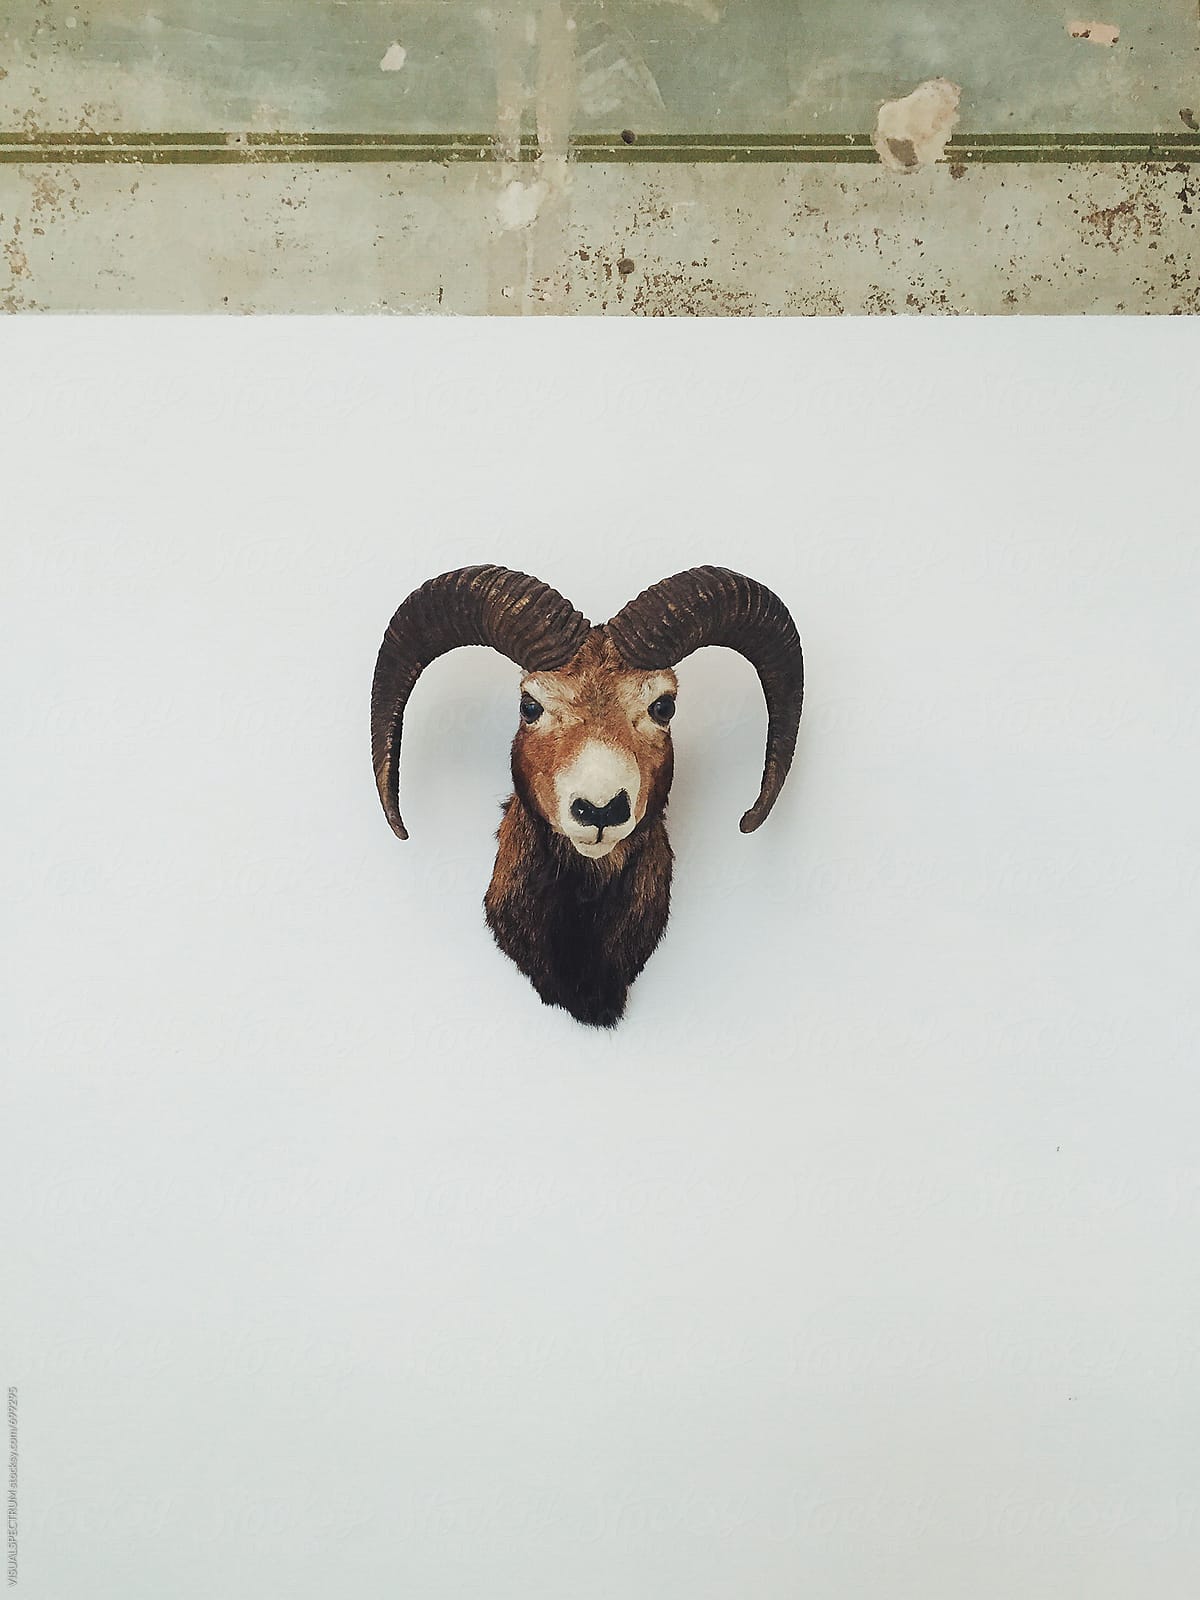 Billy Goat Head on White Wall